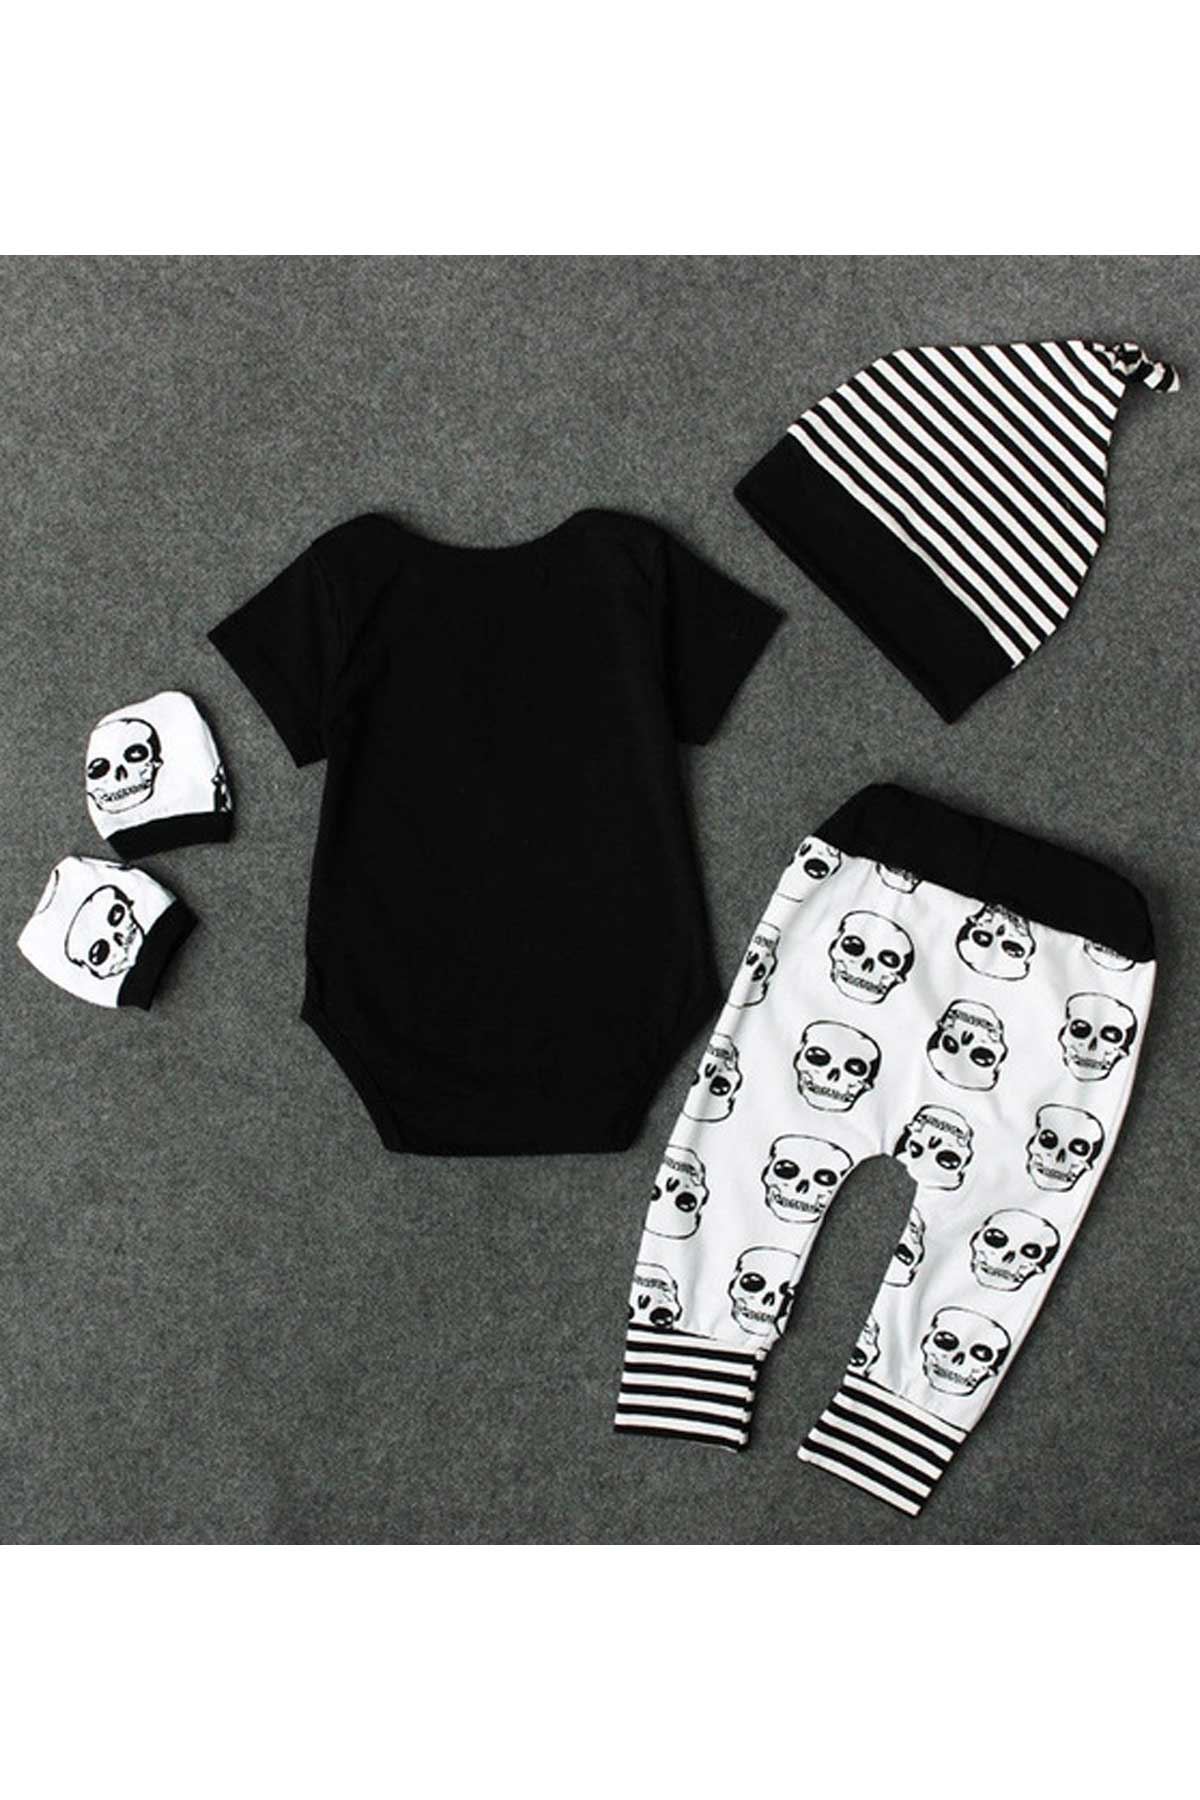 2021 Summer Baby Boy Girl Skull Clothes Romper + Long Pant Hat 4 pcs Outfit Set 0-18M Baby rompers girls boys newborn clothes